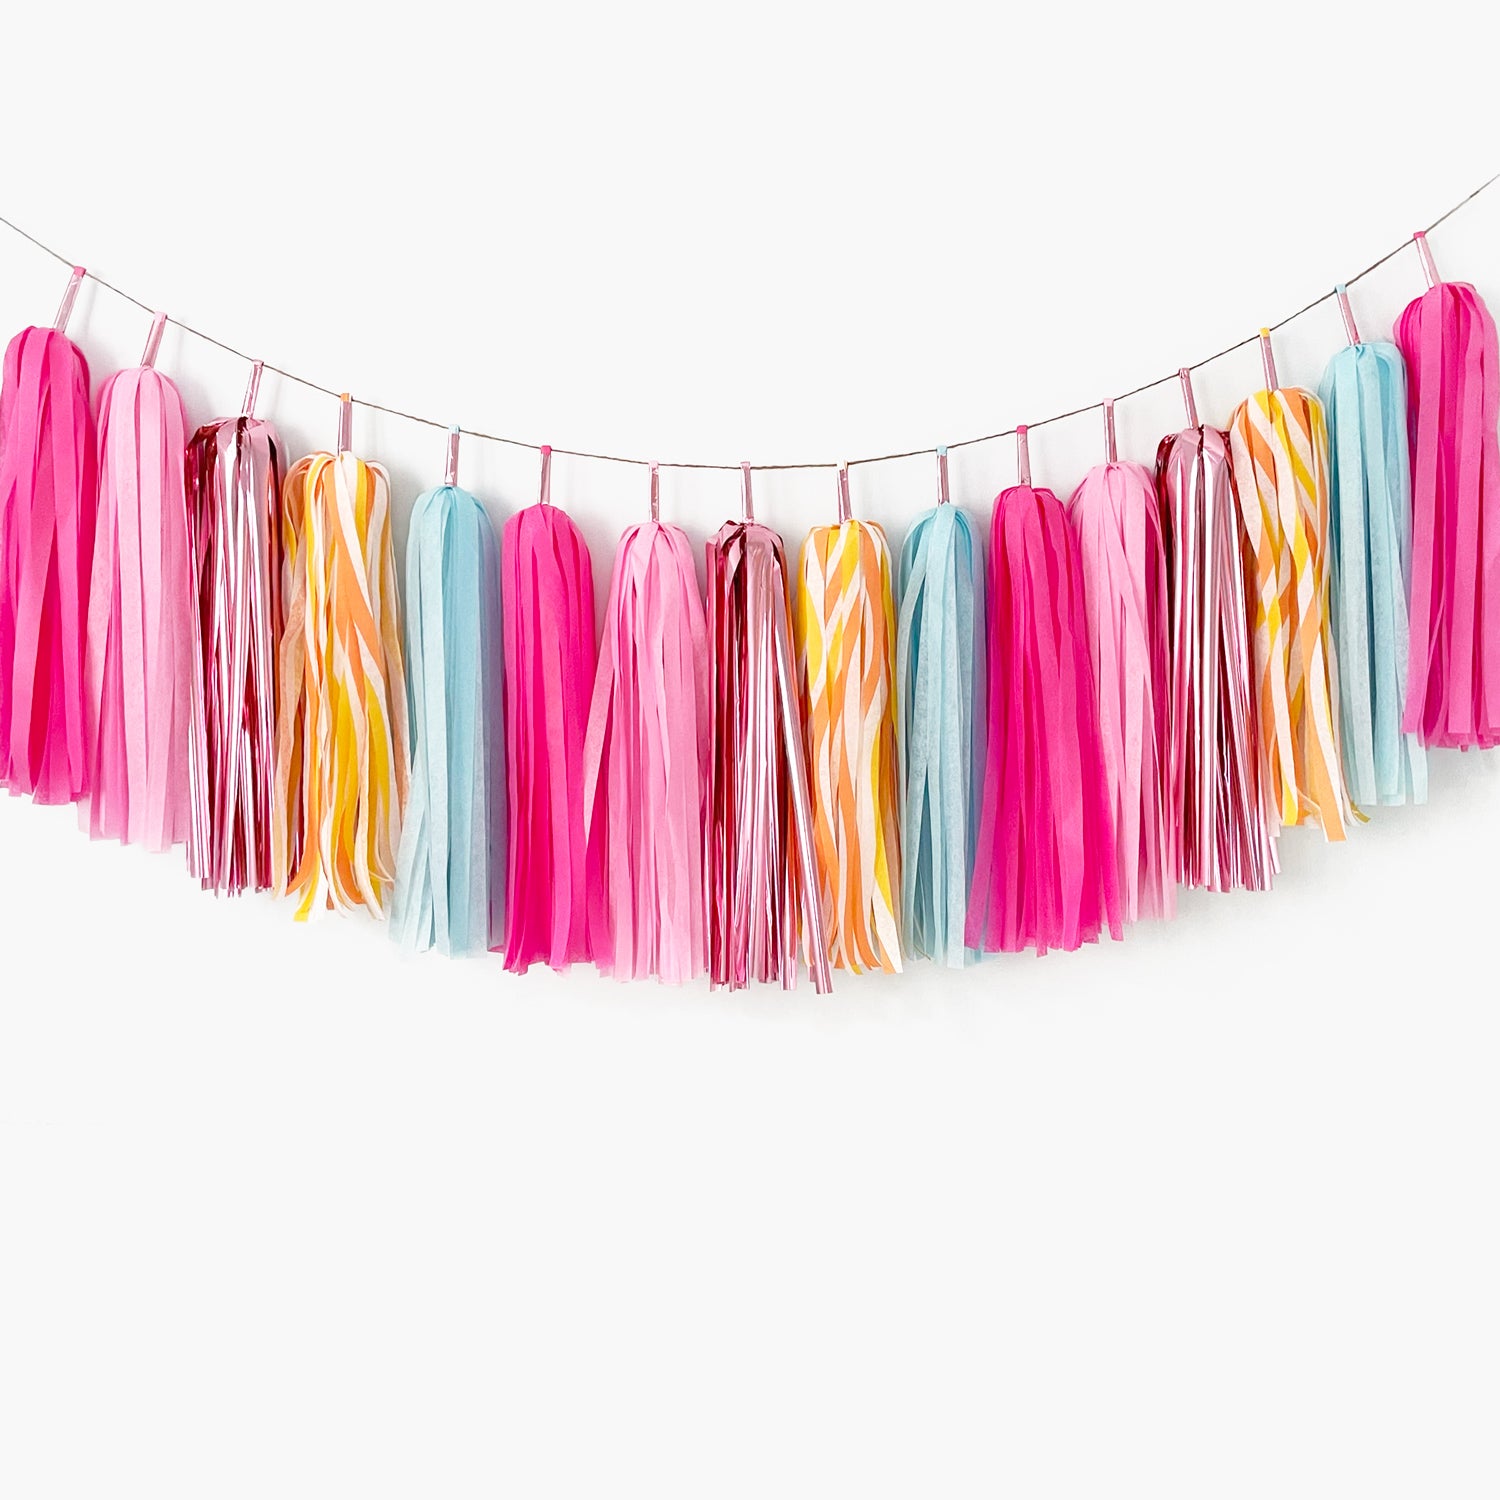 Dollhouse Delight Tassel Garland - Girls Dolls Toys Movie Inspired Pink and Blue Party Paper Banner Bunting Streamers Backdrop